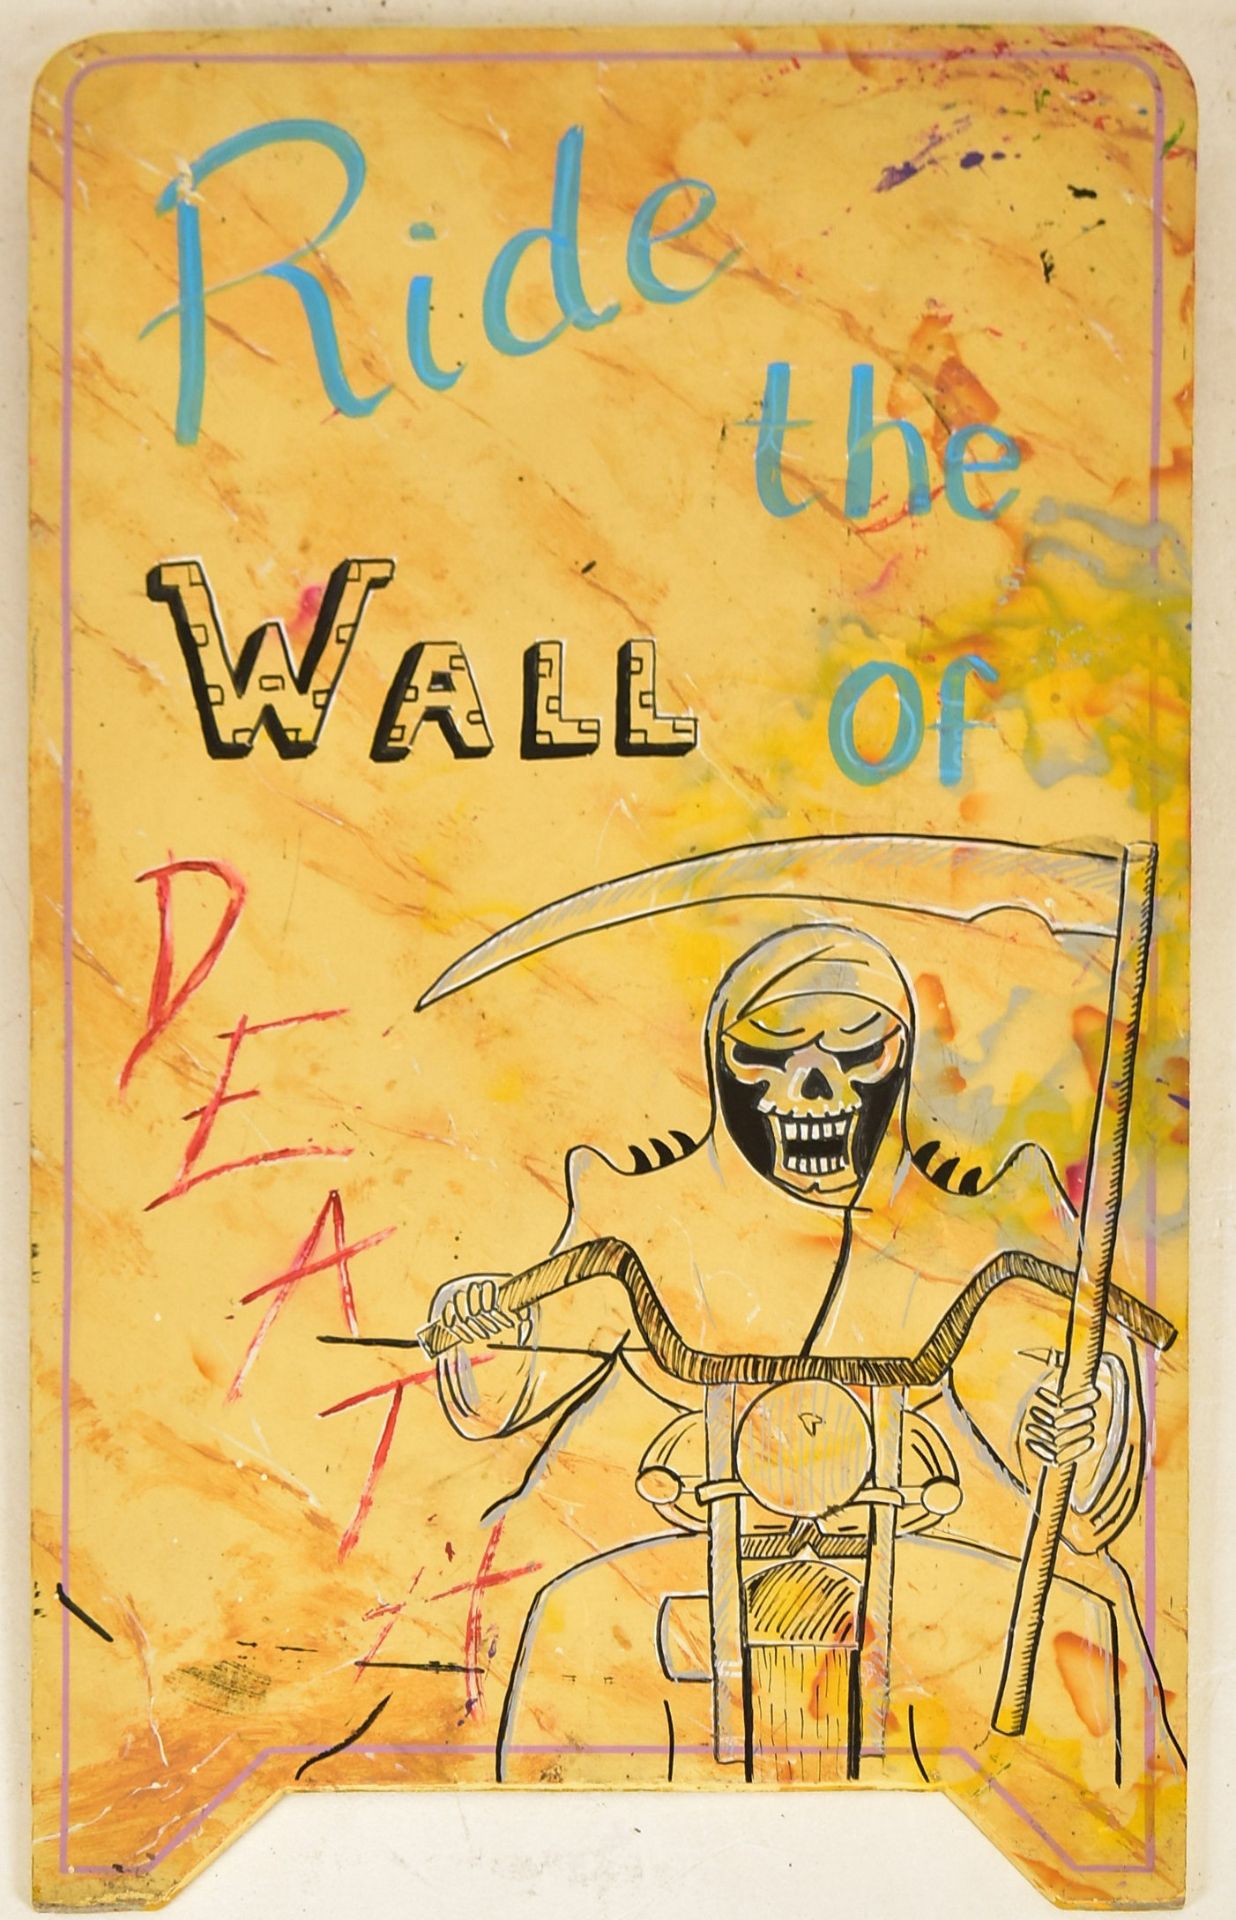 RIDE THE WALL OF DEATH - 20TH CENTURY FAIRGROUND SIGN